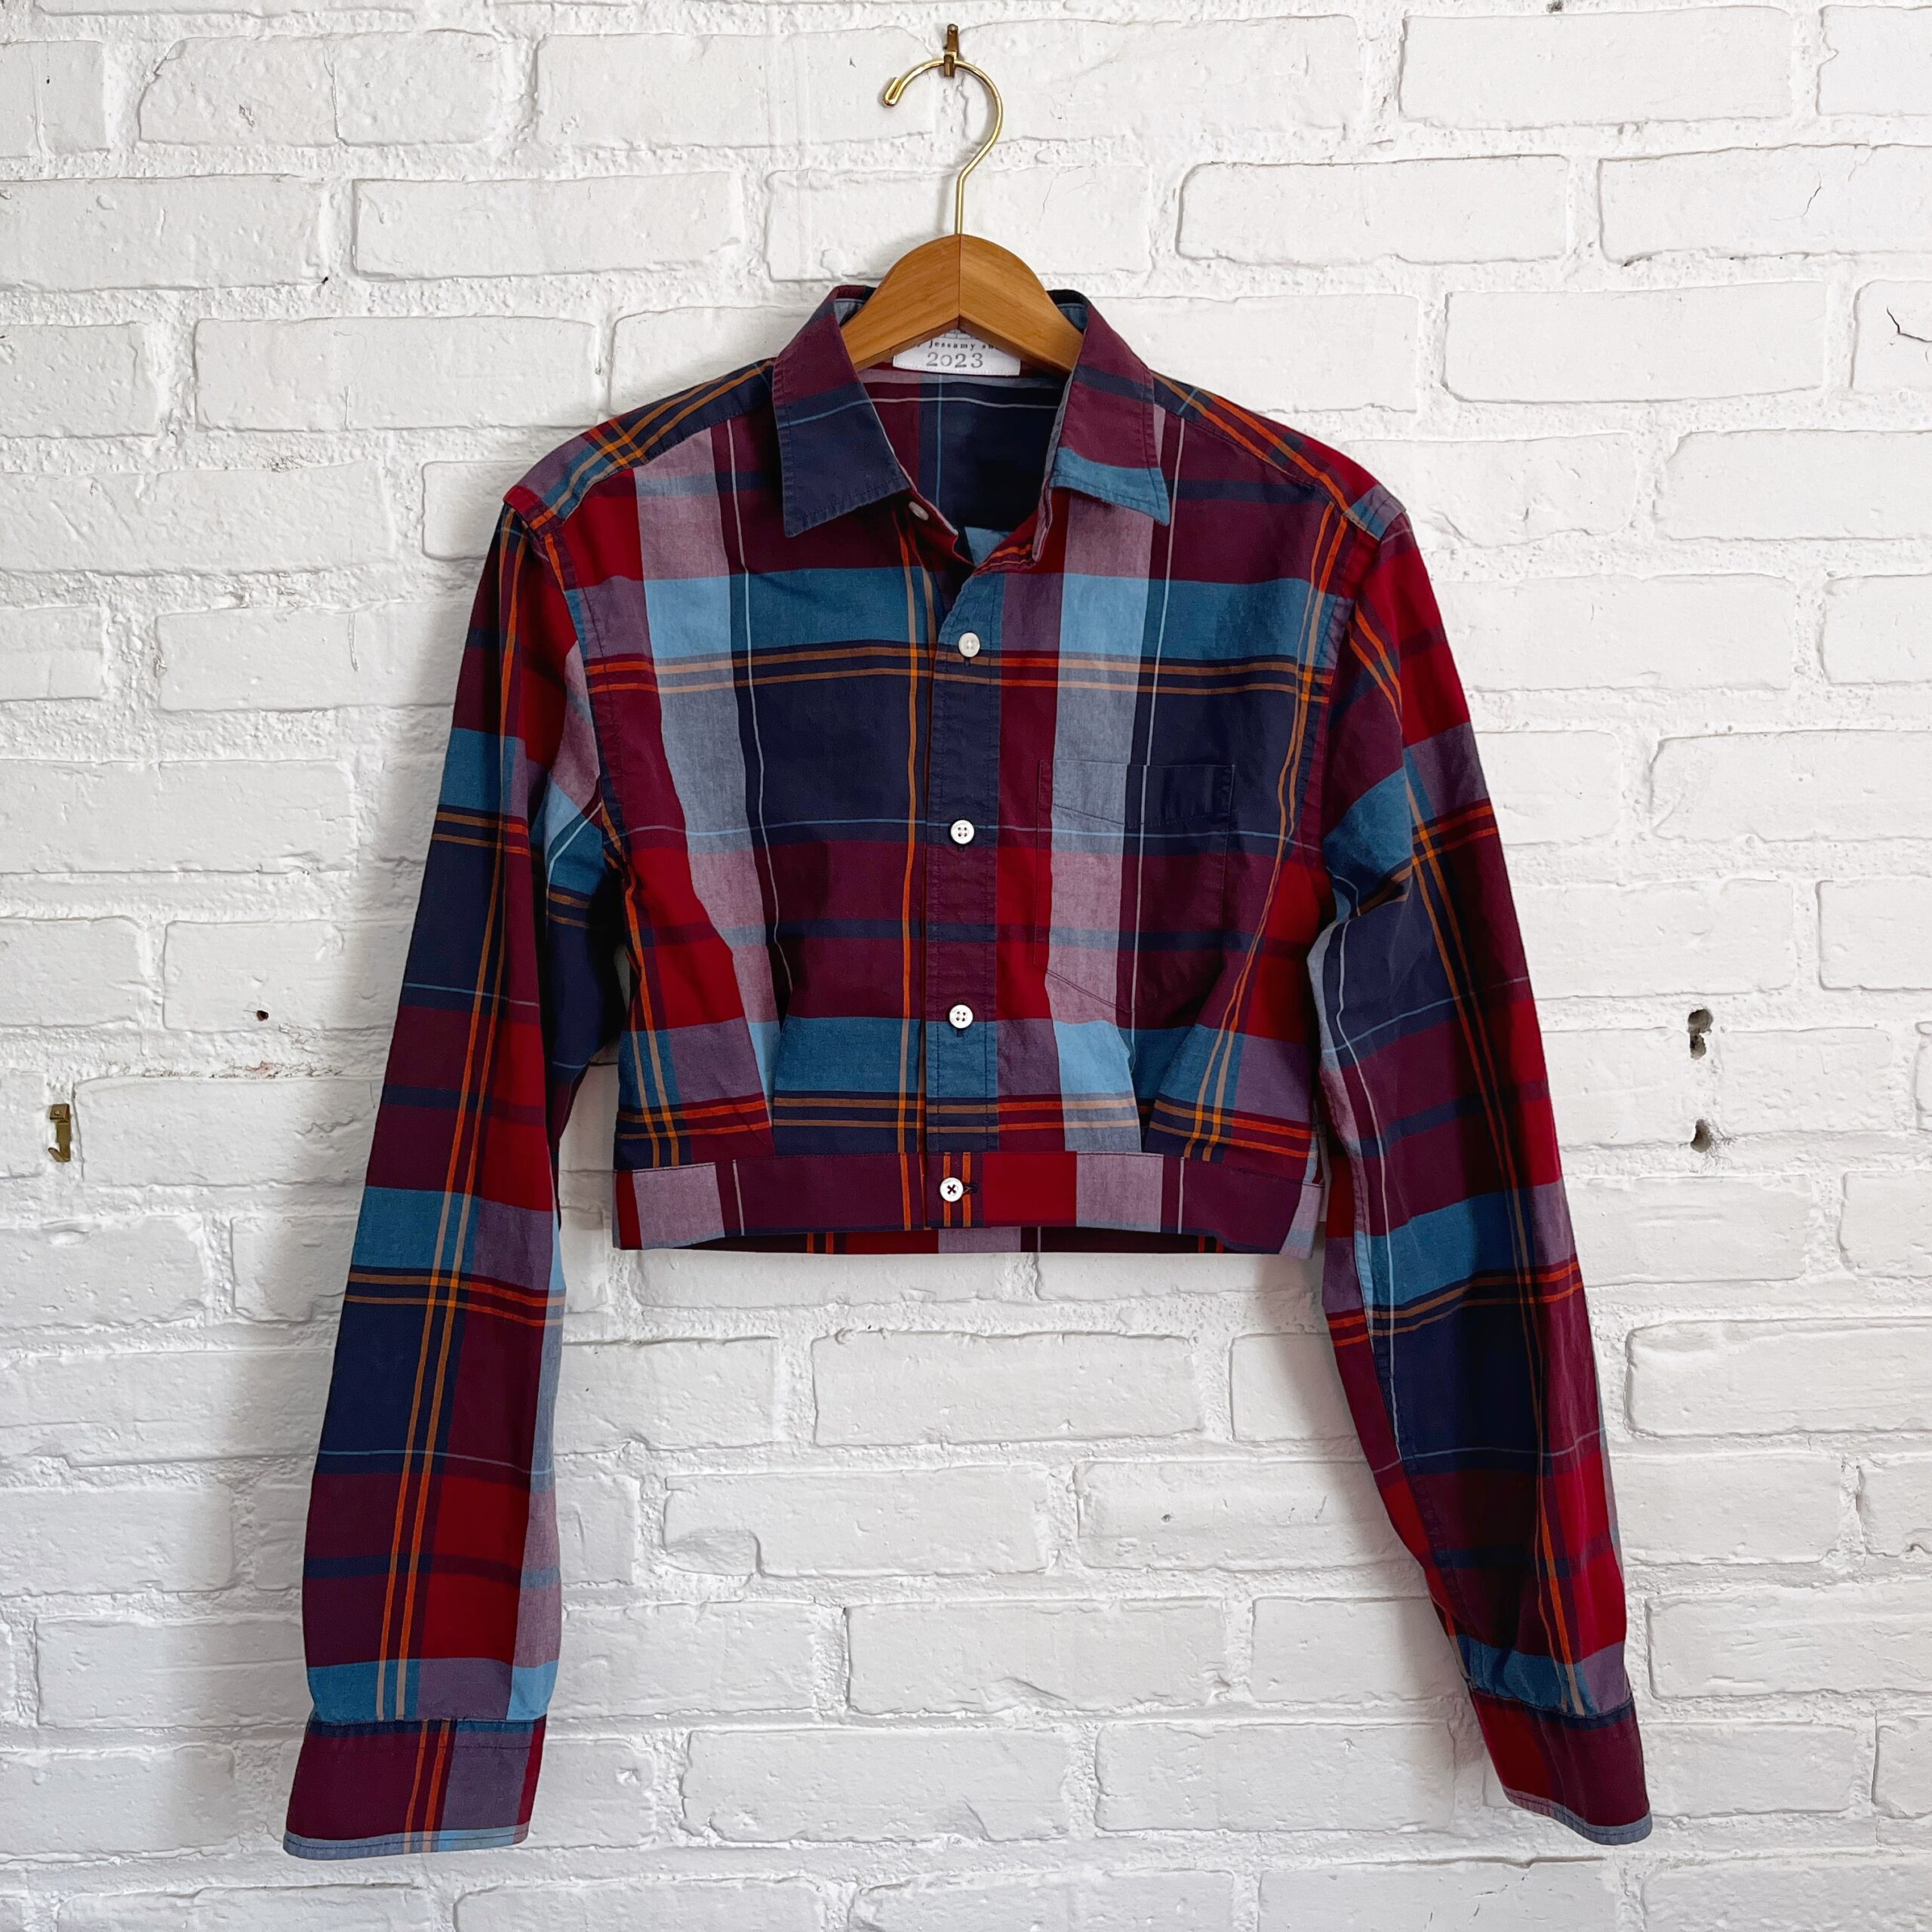 A red and blue plaid shirt hanging on a brick wall.